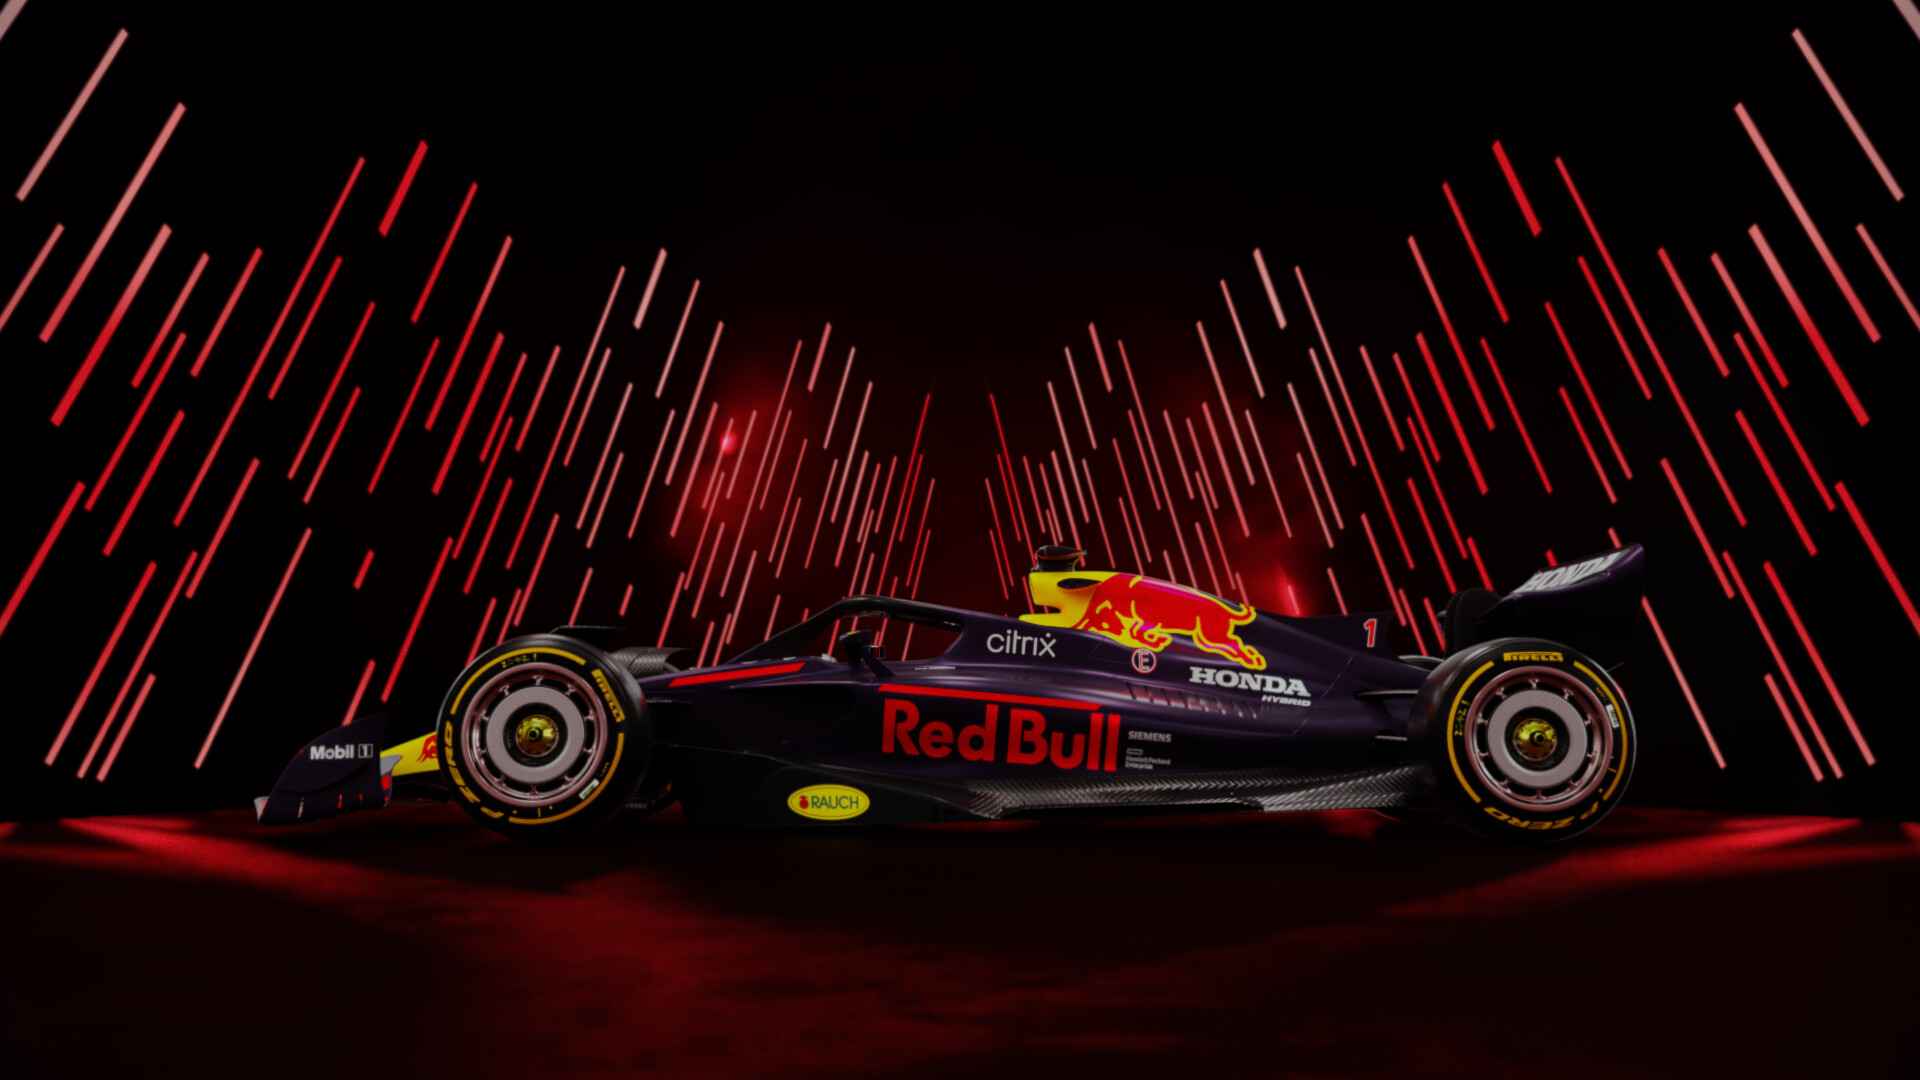 Red Bull RB18 concept - Finished Projects - Blender Artists Community